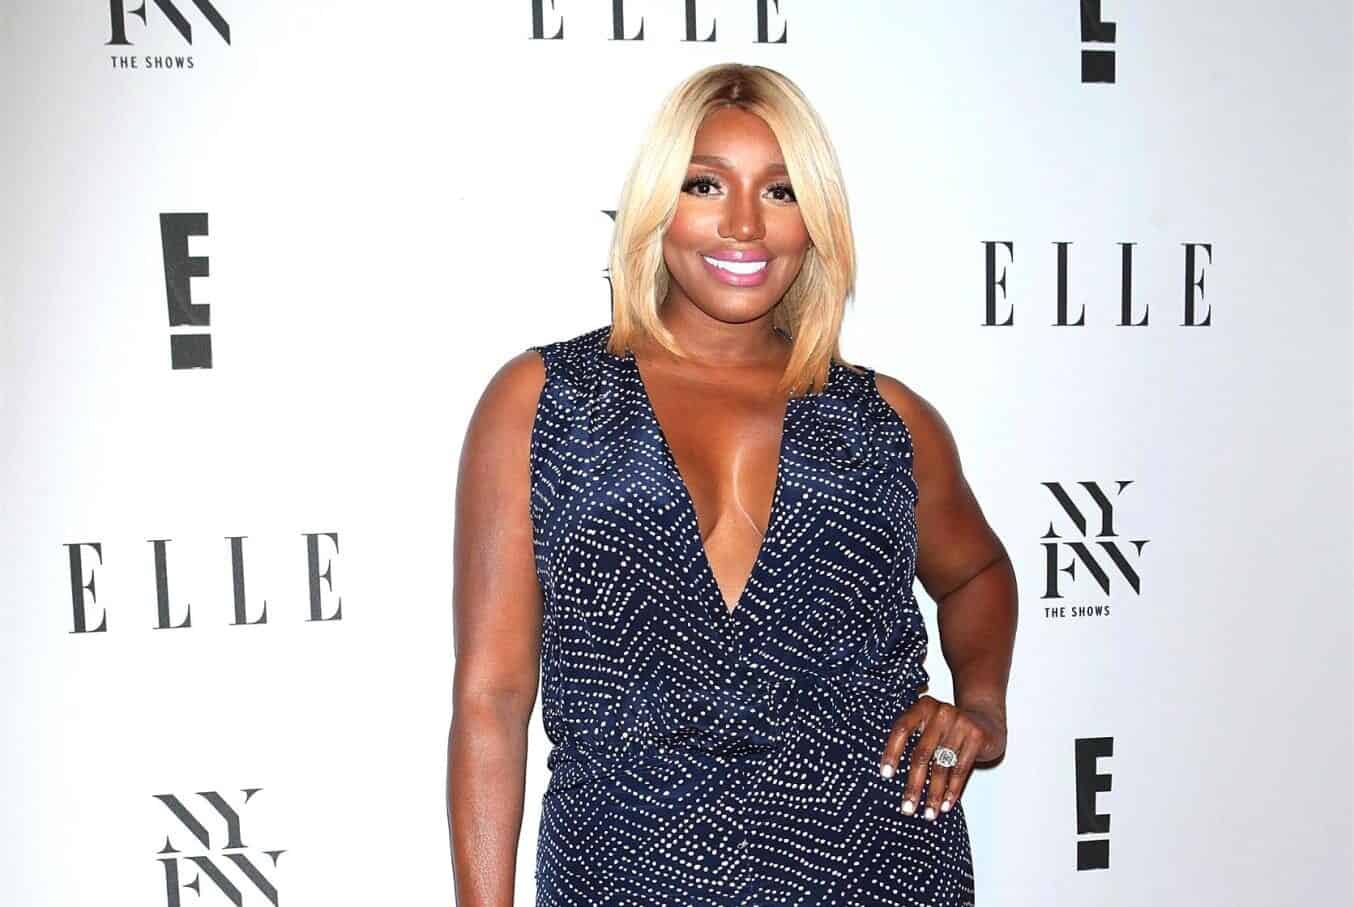 NeNe Leakes Files Lawsuit Against Bravo and Andy Cohen for Alleged Racist Work Environment on RHOA